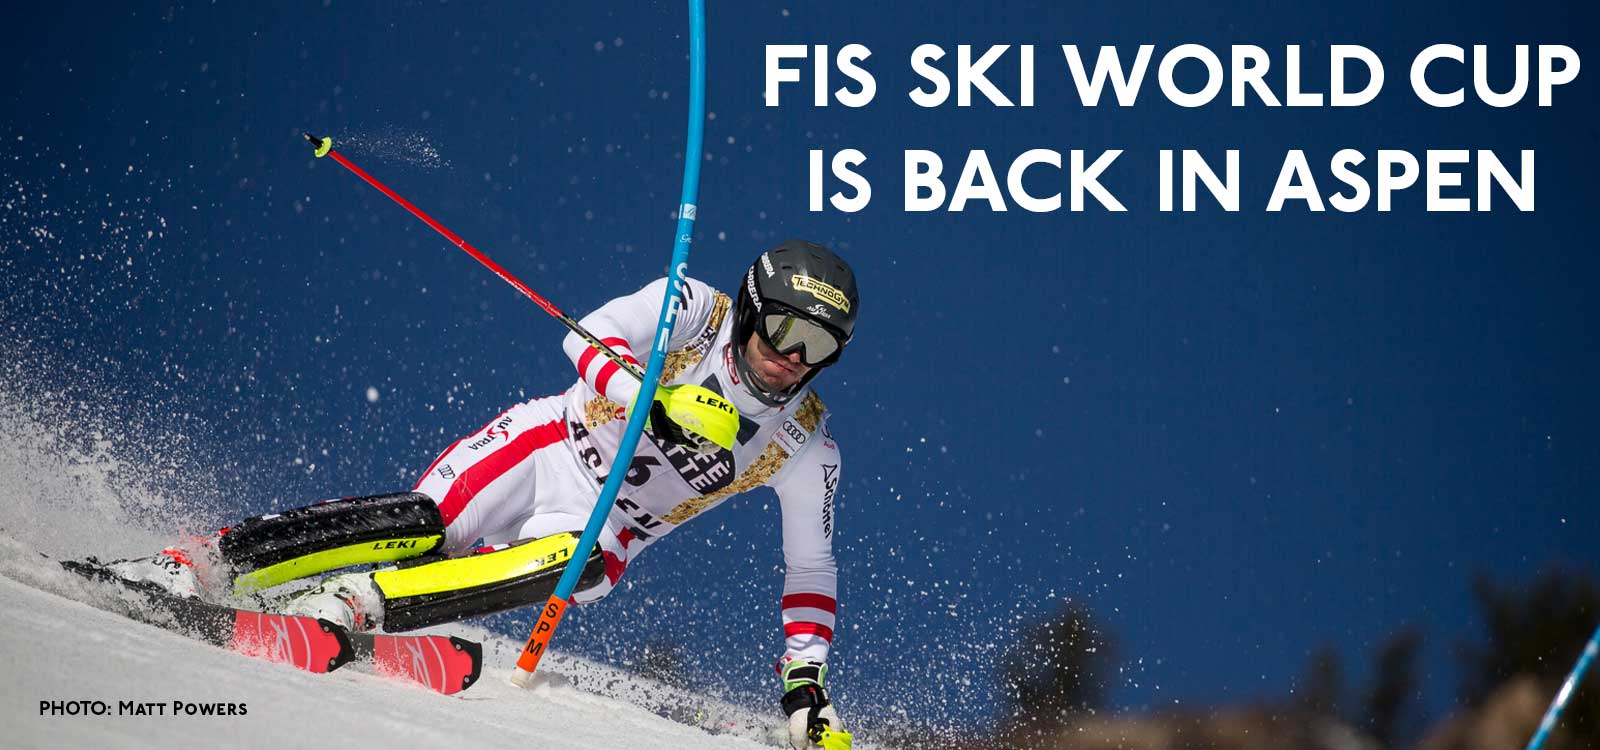 FIS Ski World Cup is Back in Aspen, March 1 - 3